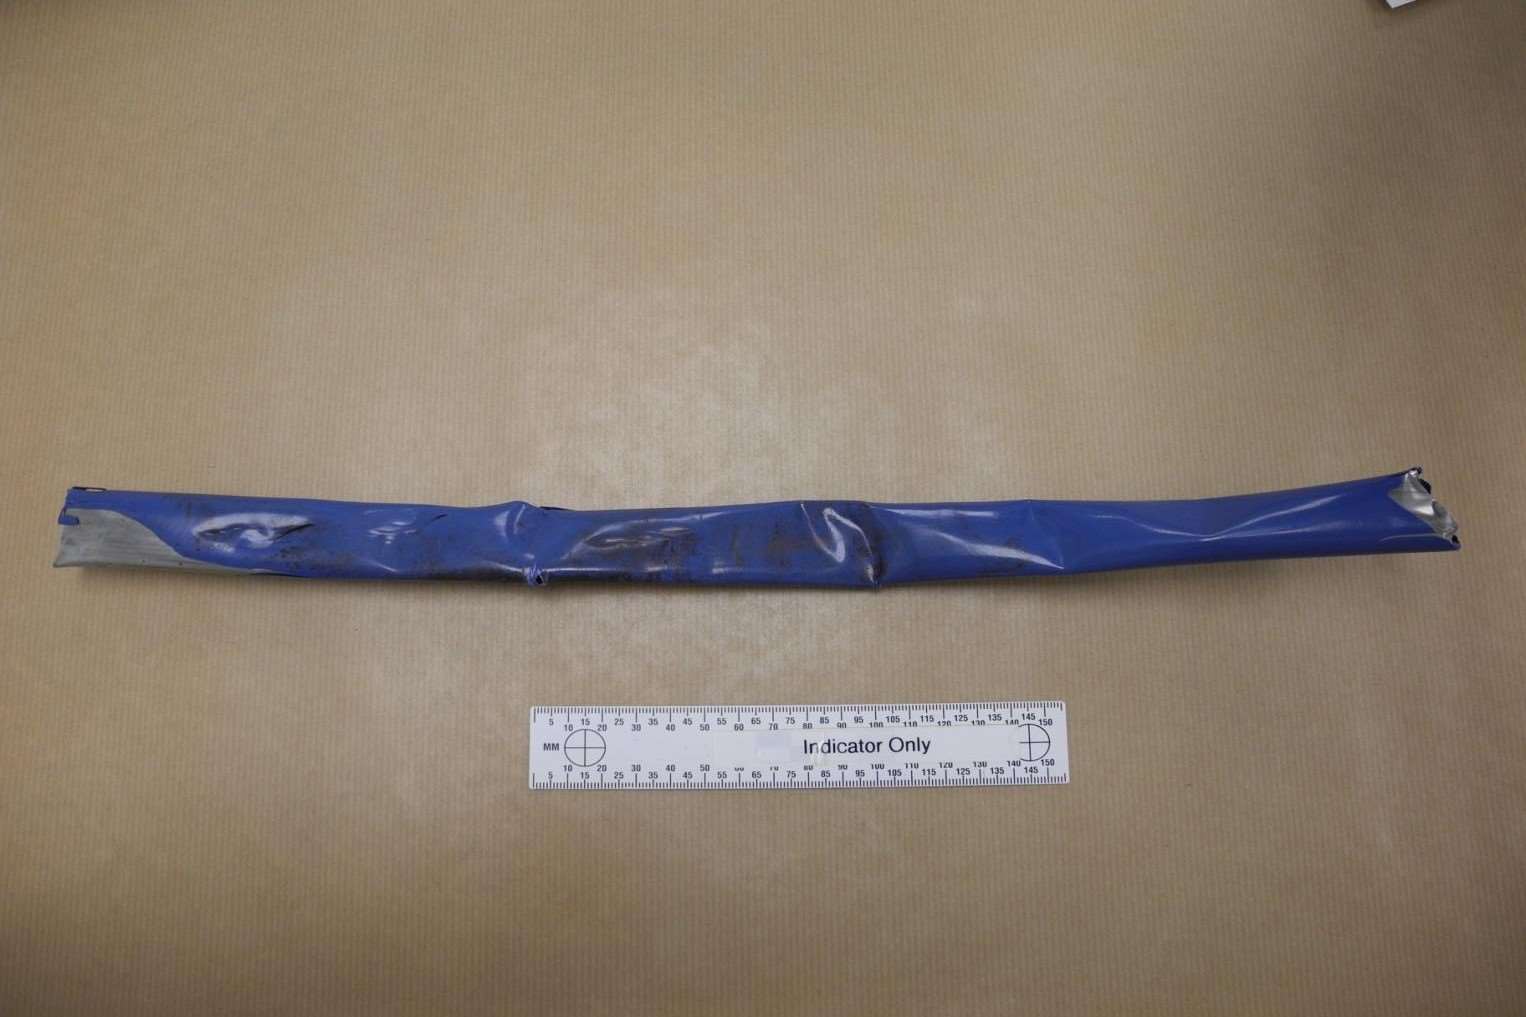 One of the weapons in a picture released by the police